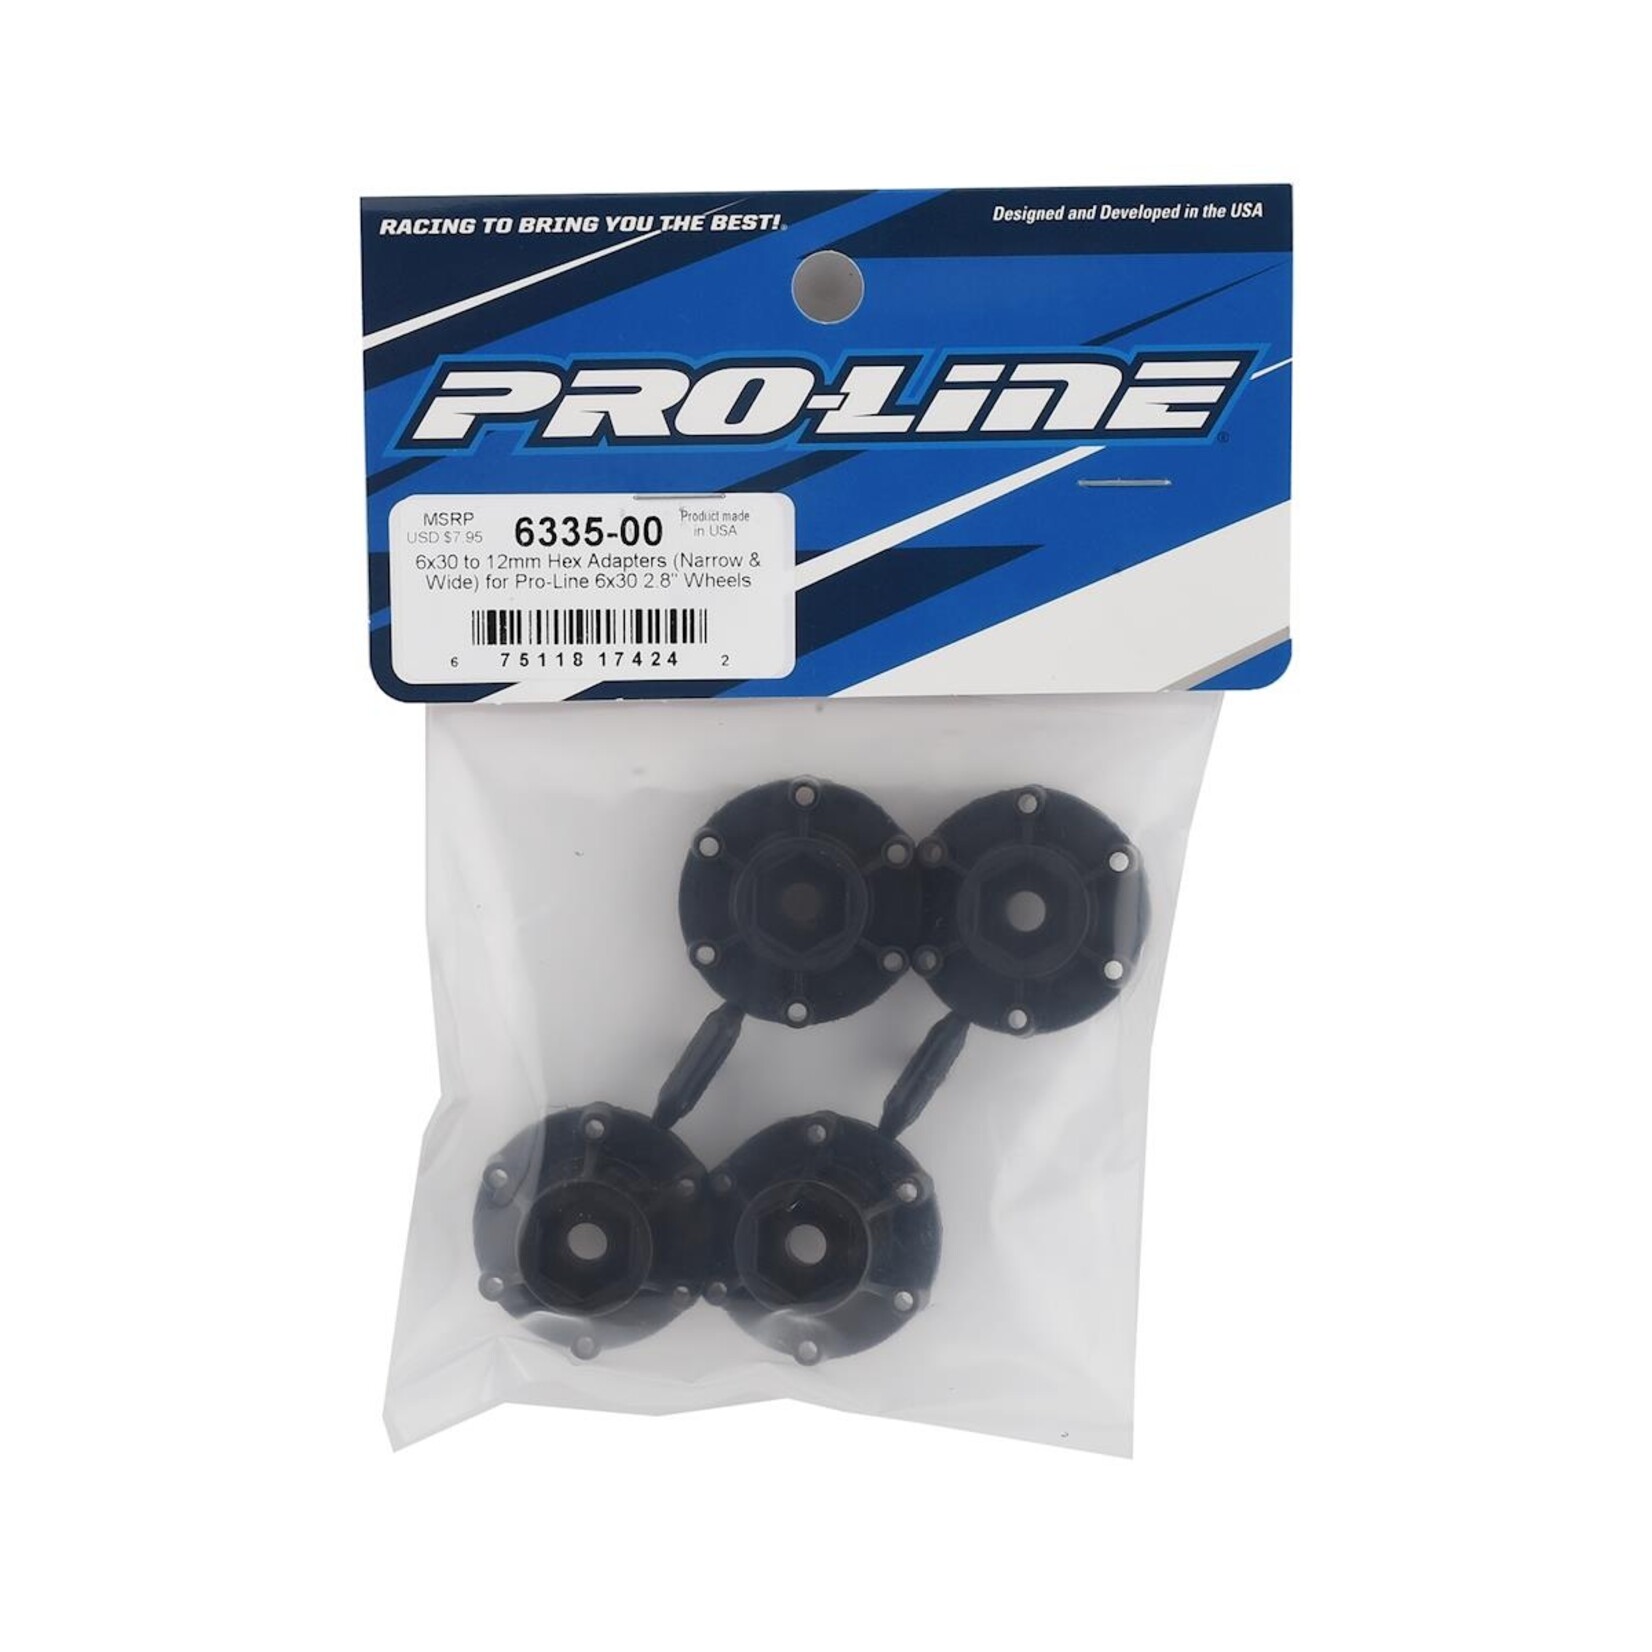 Pro-Line ProLine 6X30 To 12mm Hex Adapters Narrow & Wide For Proline 6x30 2.8 Wheels 6335-00